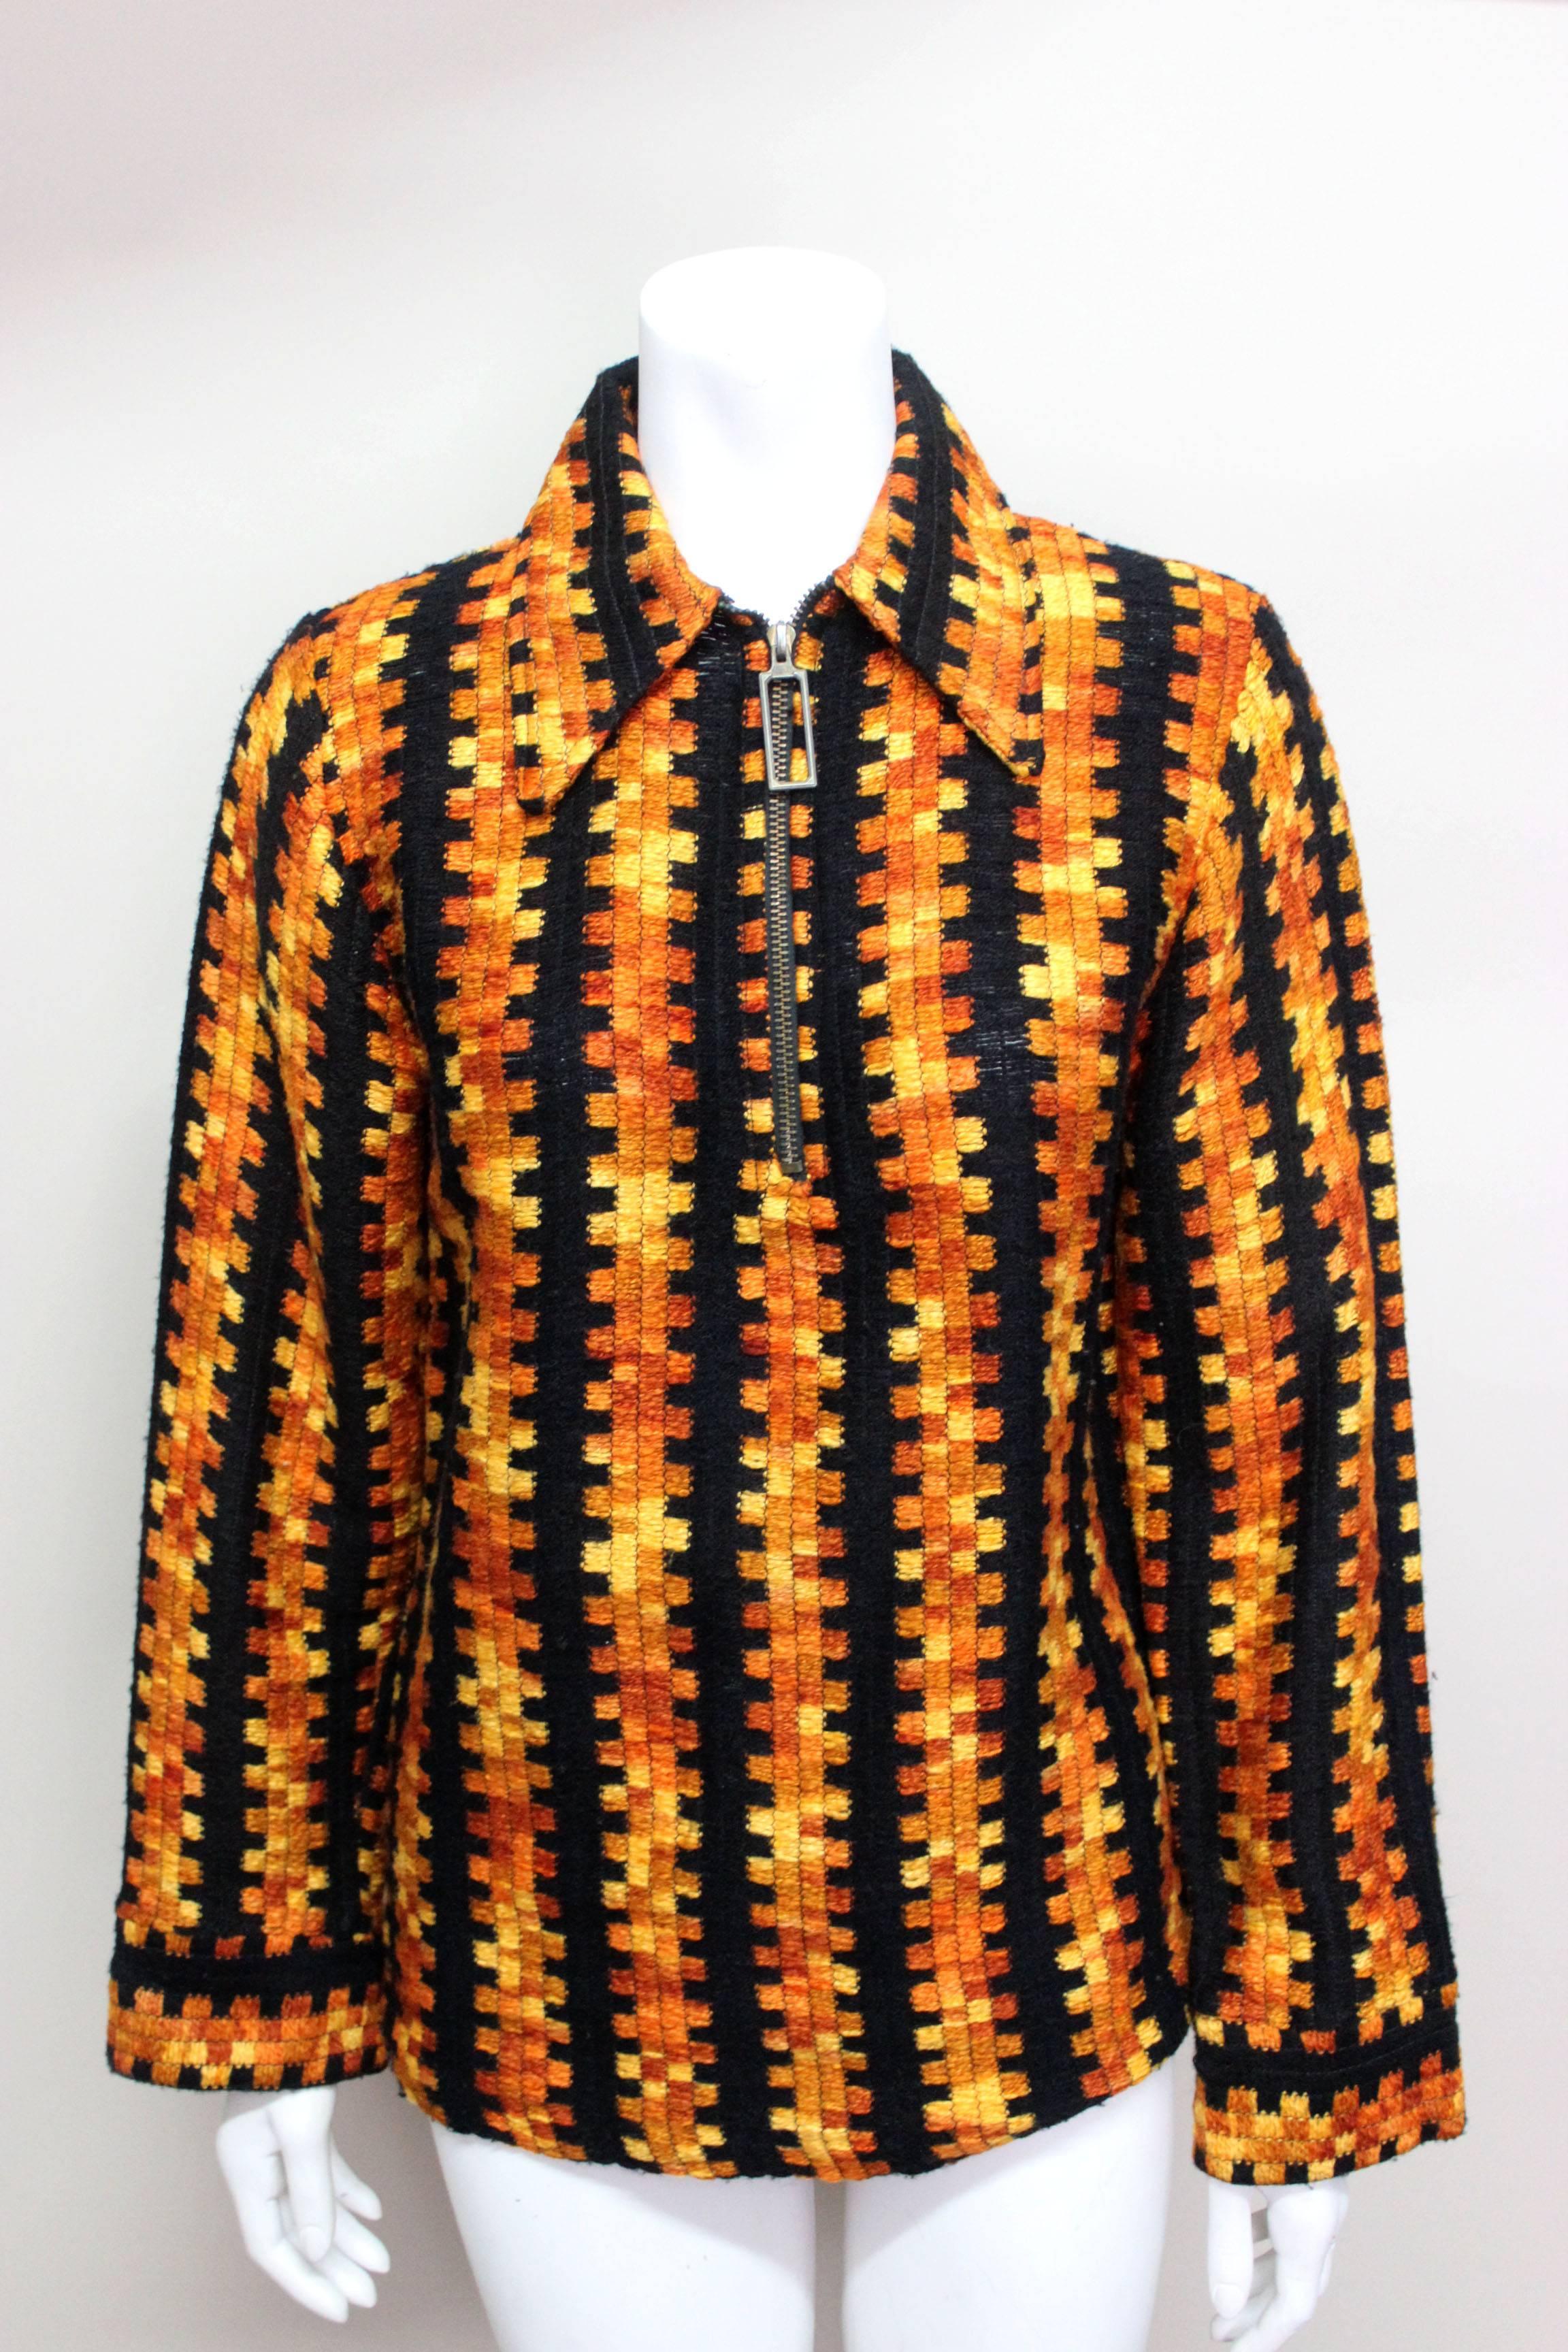 This 1970's knit is an exceptional piece. The ombre woven fabric is in a very unusual geometric pattern. The zippered front with long brass zipper pull is a quintessential 1970's style detail. 